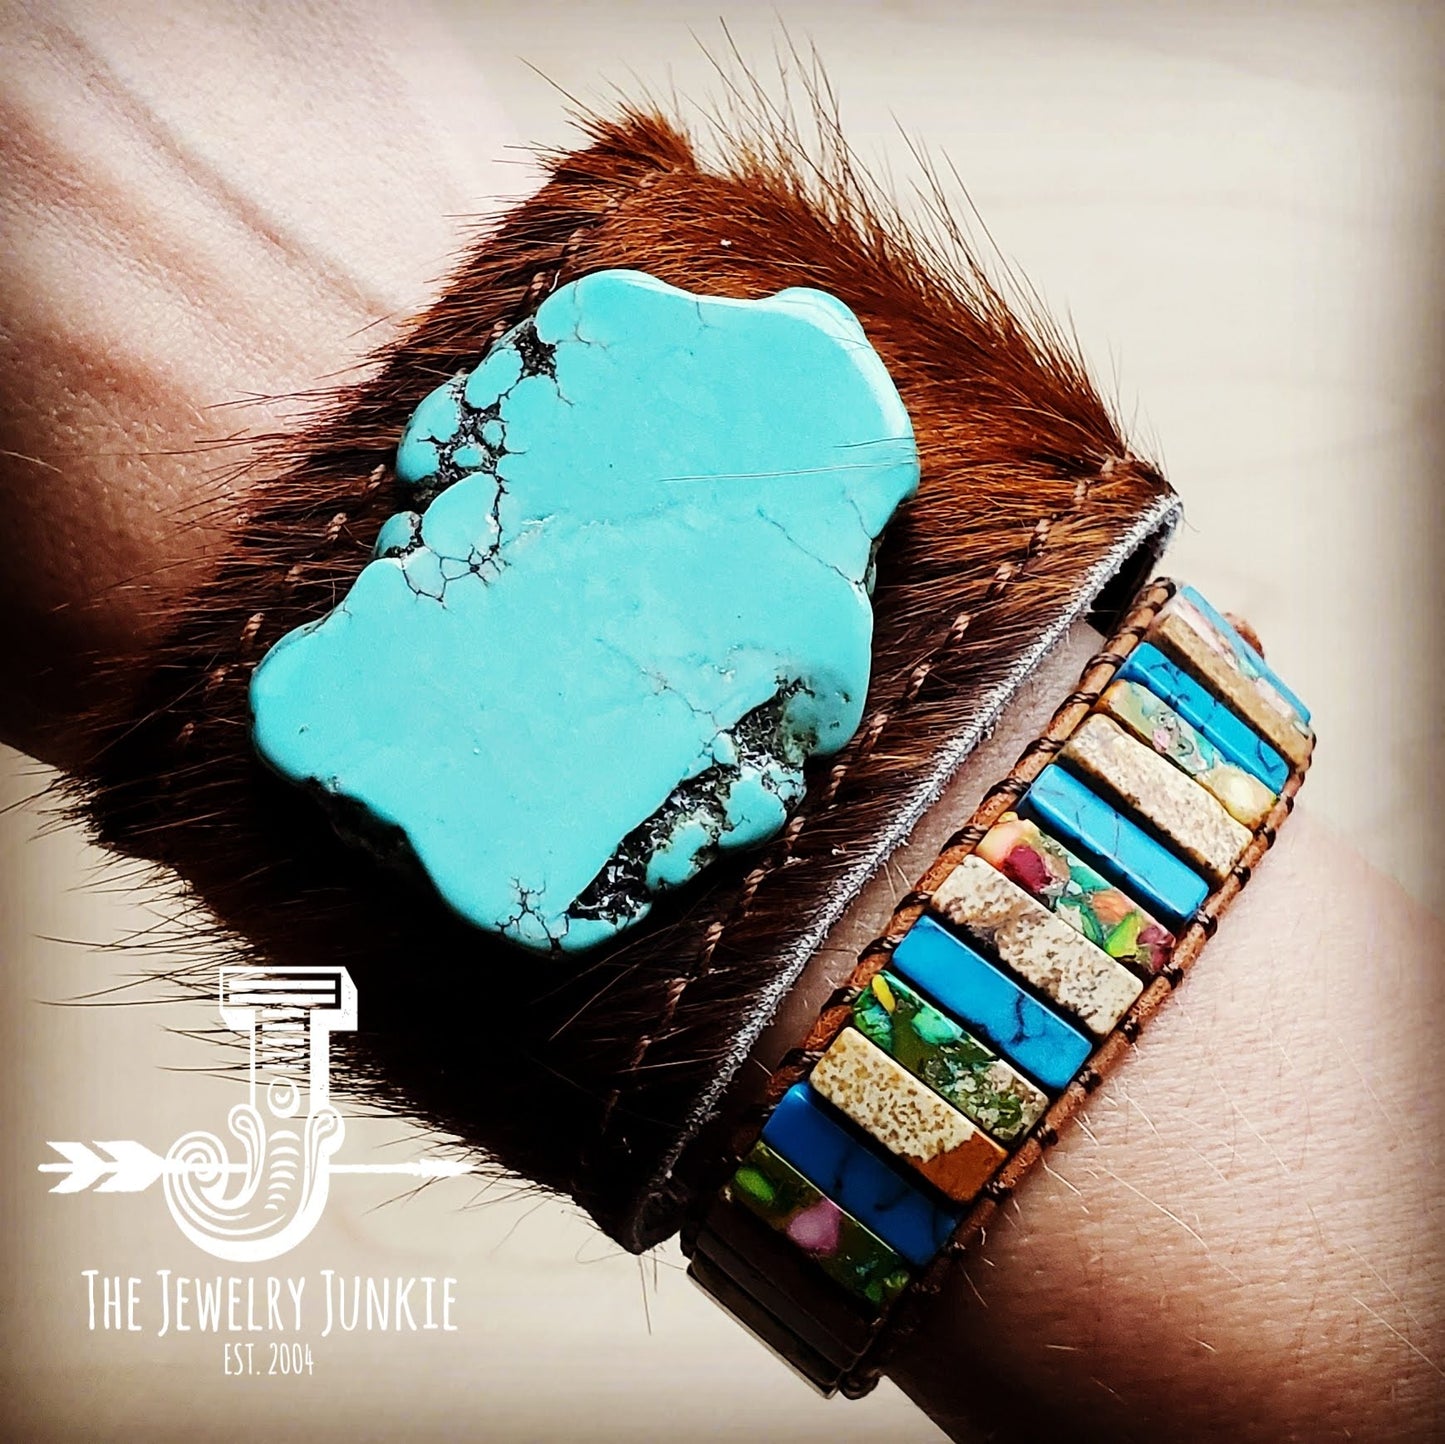 Leather Cuff w/ Leather Tie-Dark Brown Hide and Turquoise Slab (011p)